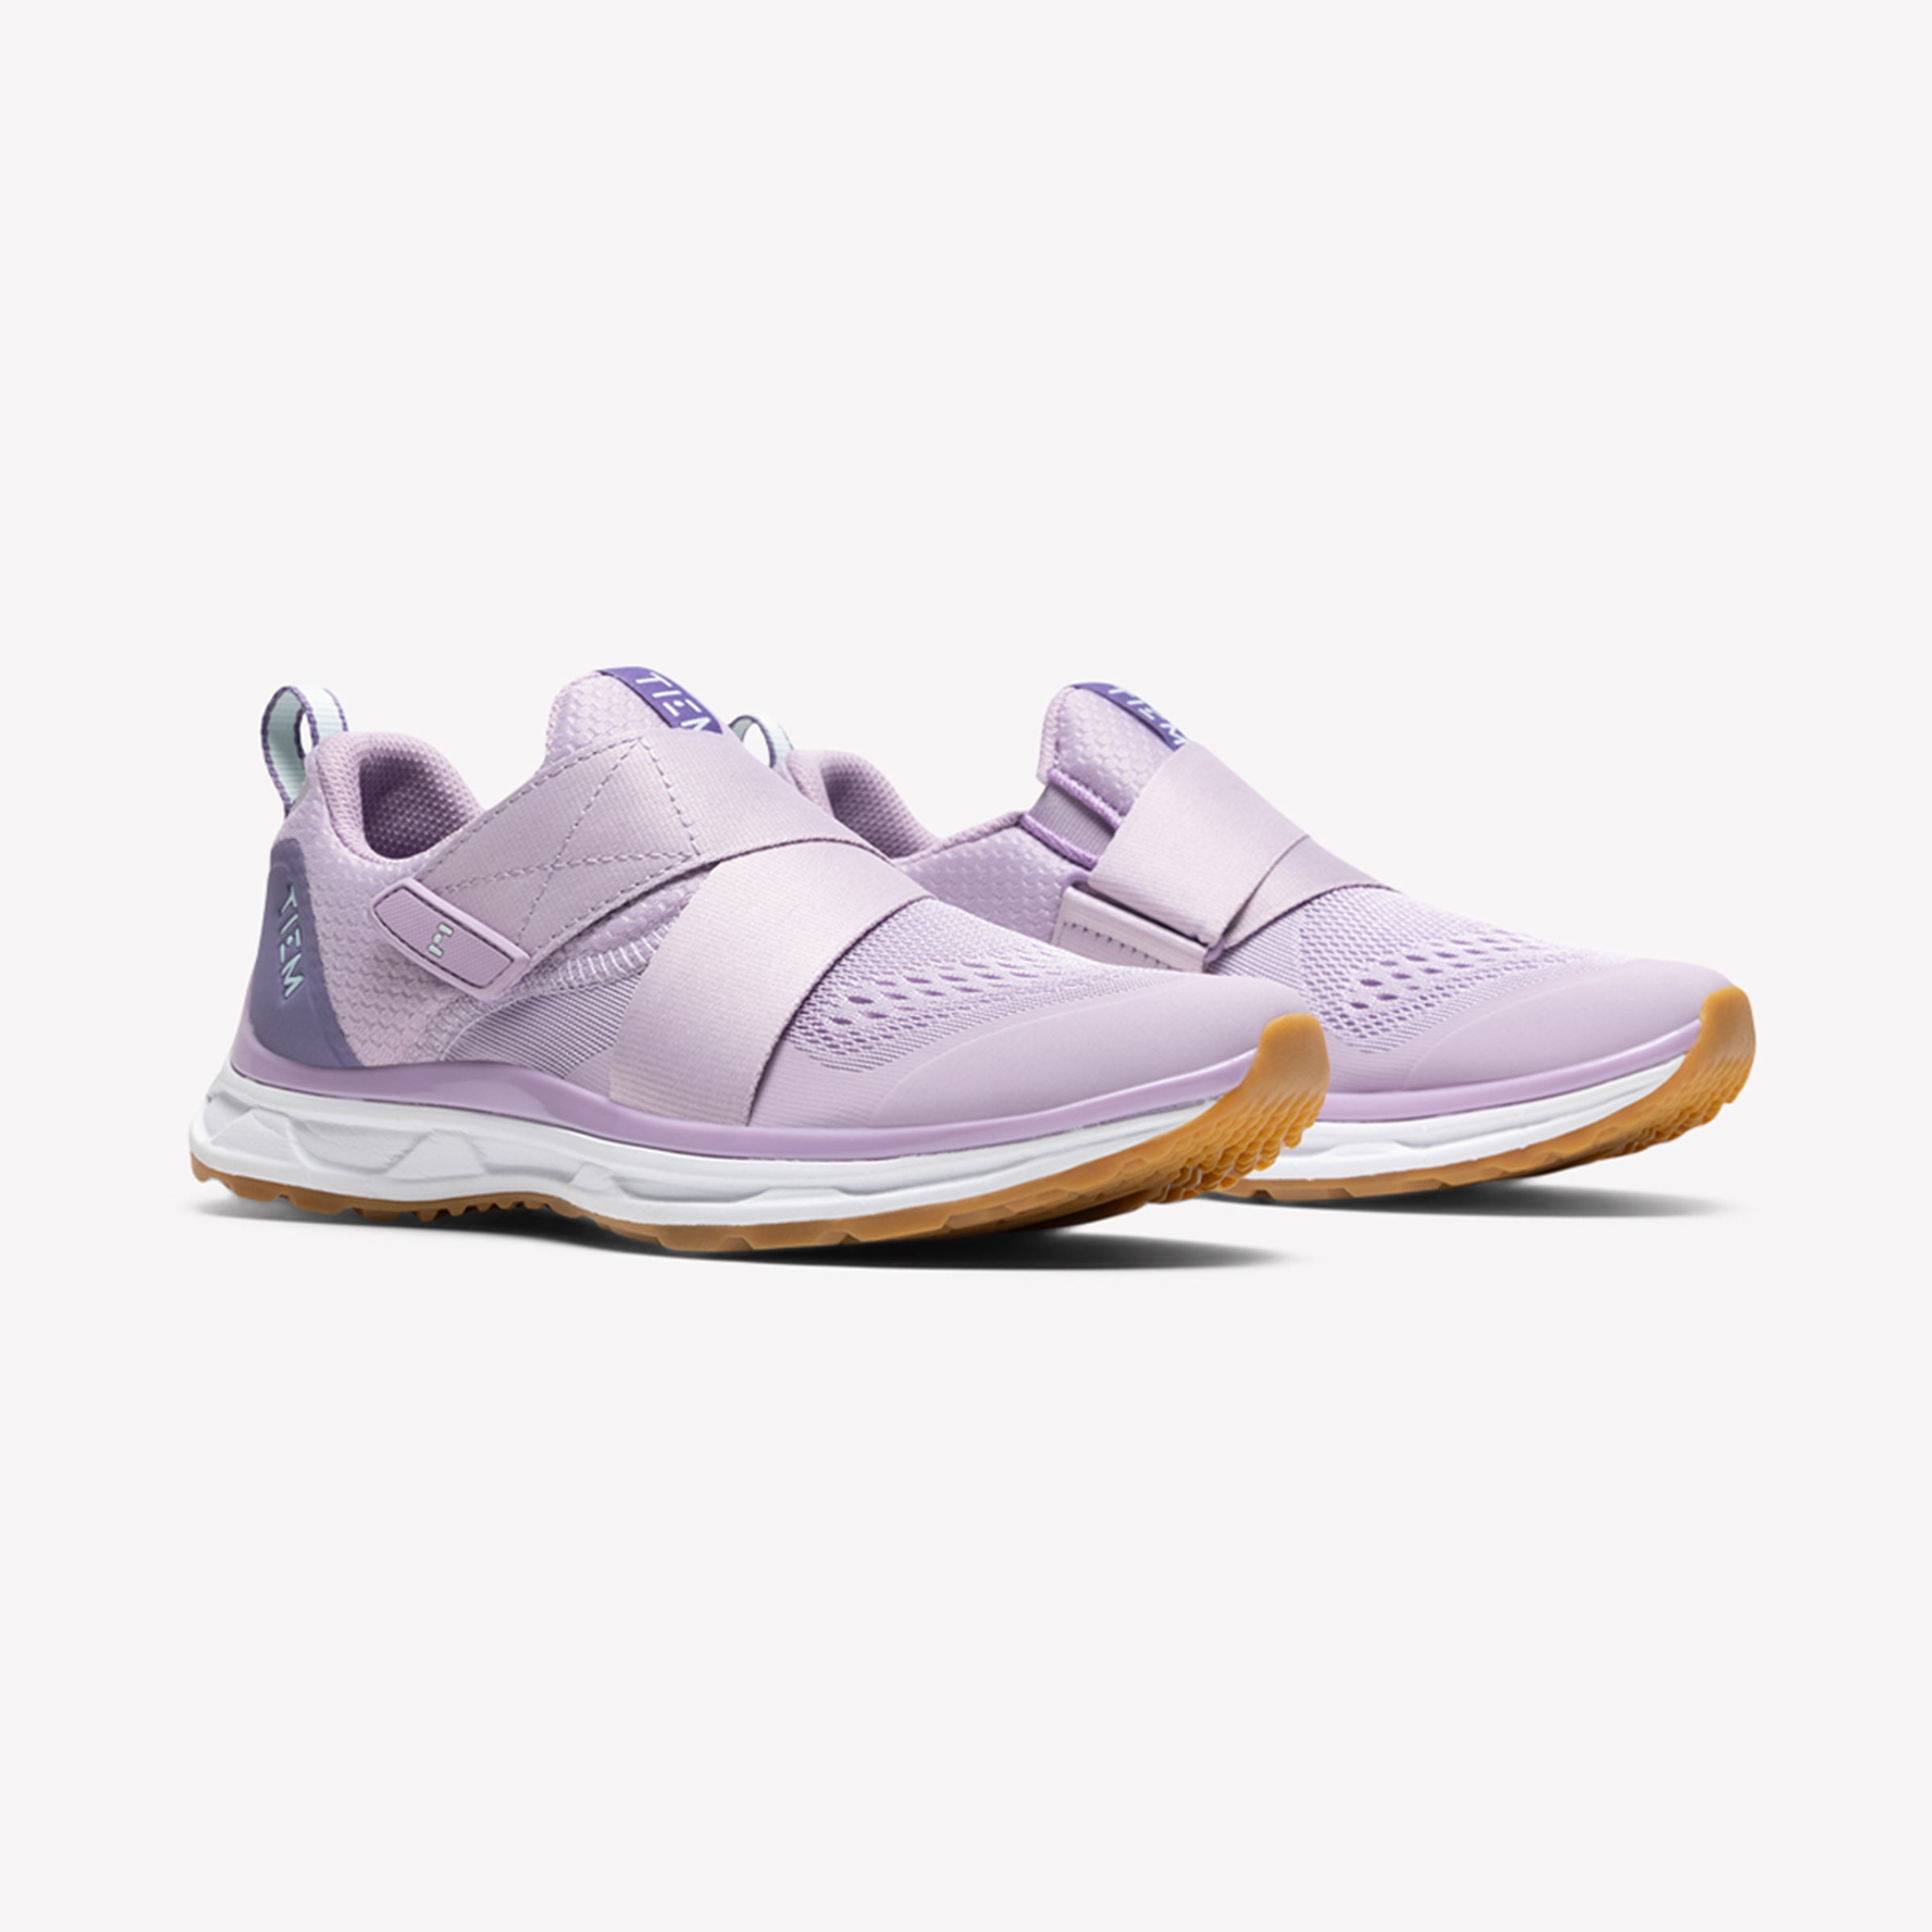 Image of Slipstream Cycling Shoe - Lilac